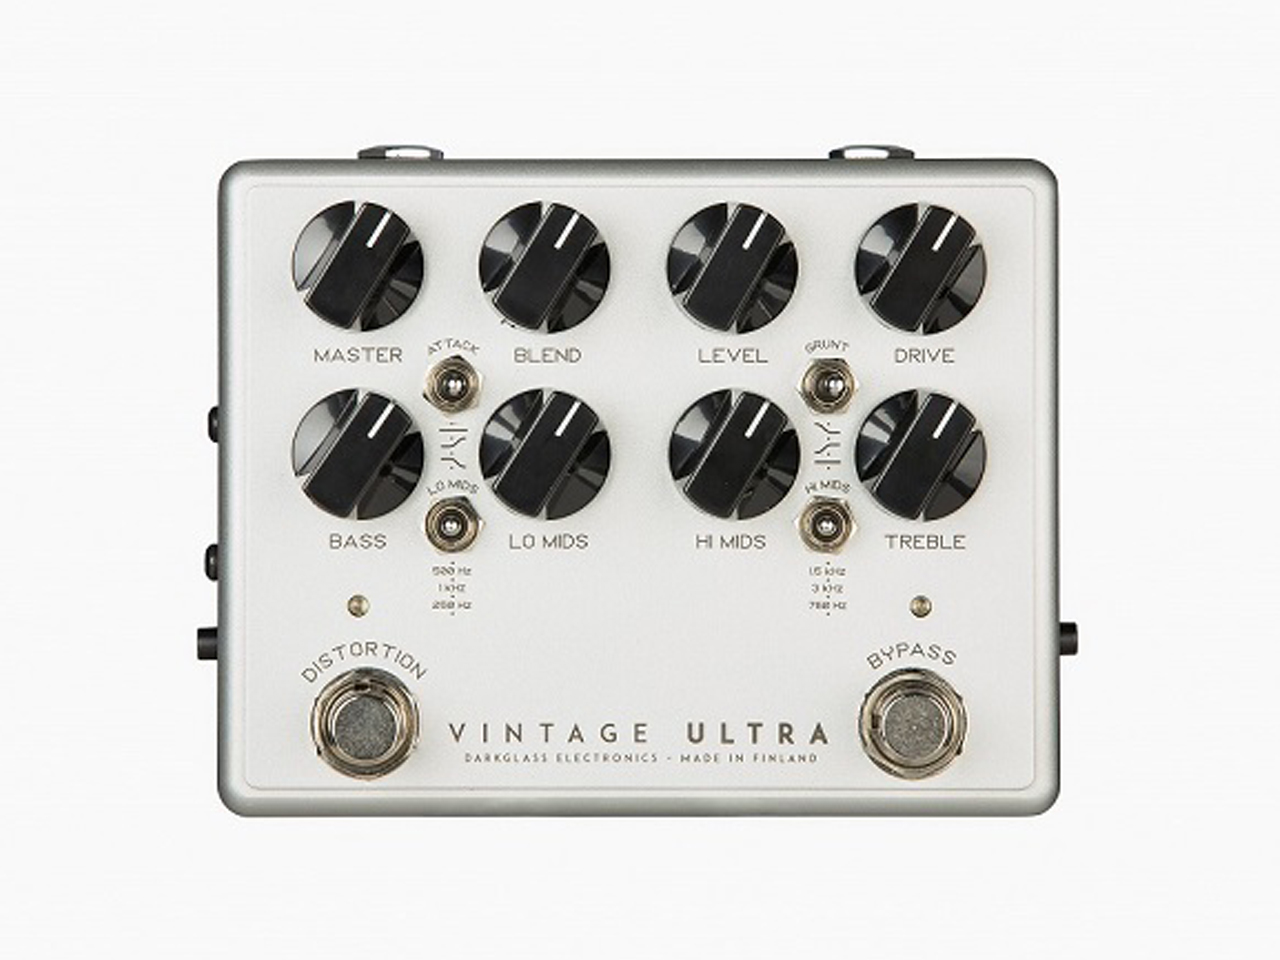 Darkglass Electronics Vintage Ultra V2 with Aux In (ベース用オーバードライブ/プリアンプ) お茶の水駅前店(東京)